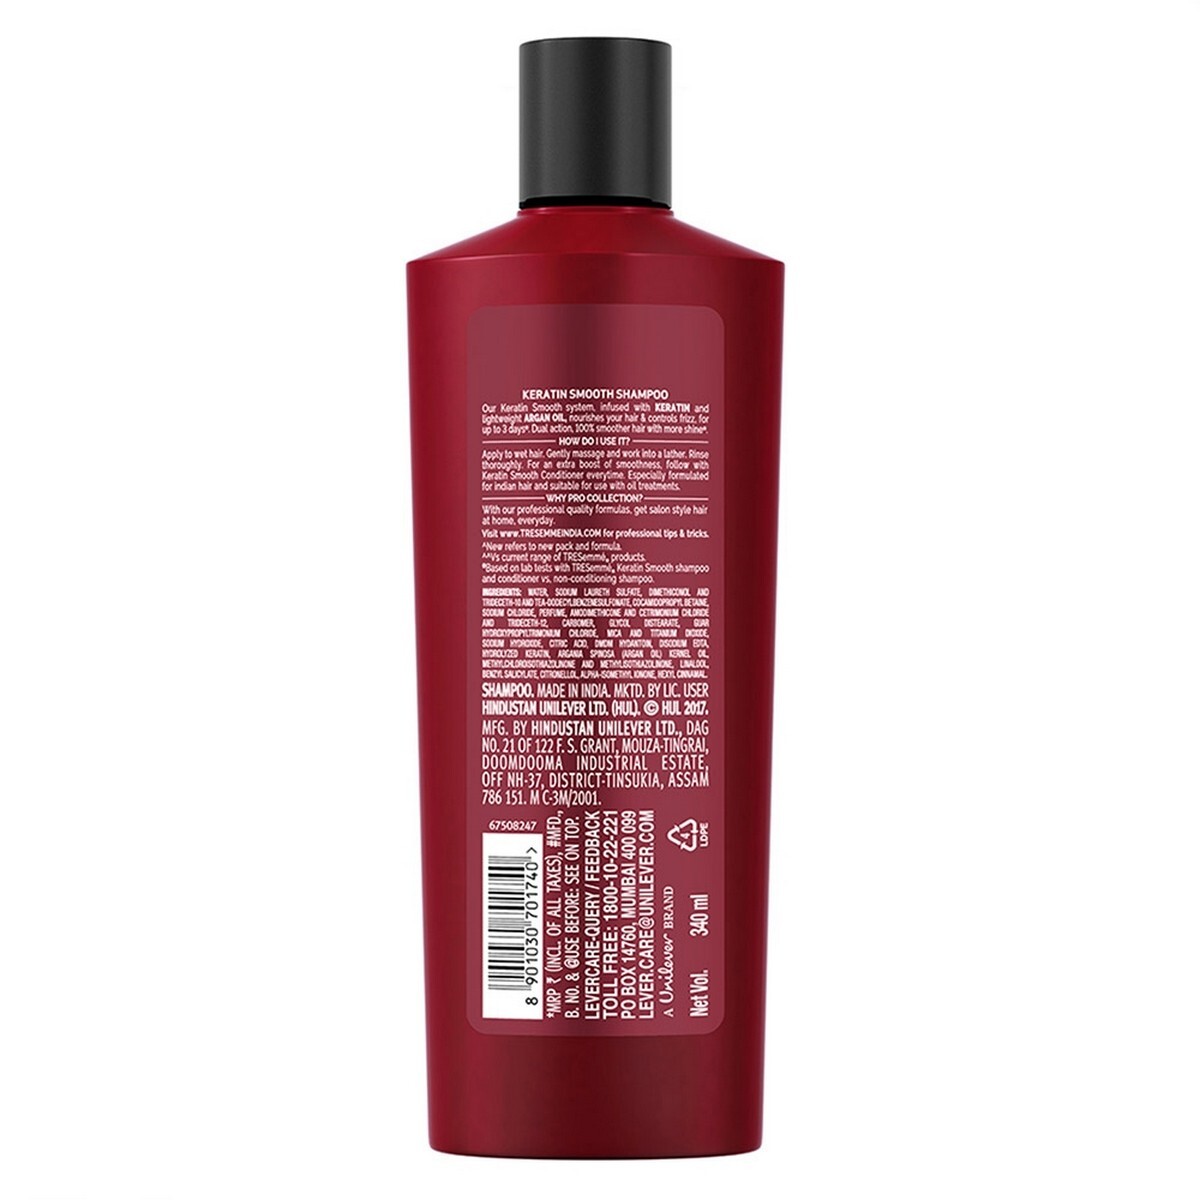 Tresemme Keratin Smooth Pro Collection Shampoo - With Argan Oil, 340 Ml